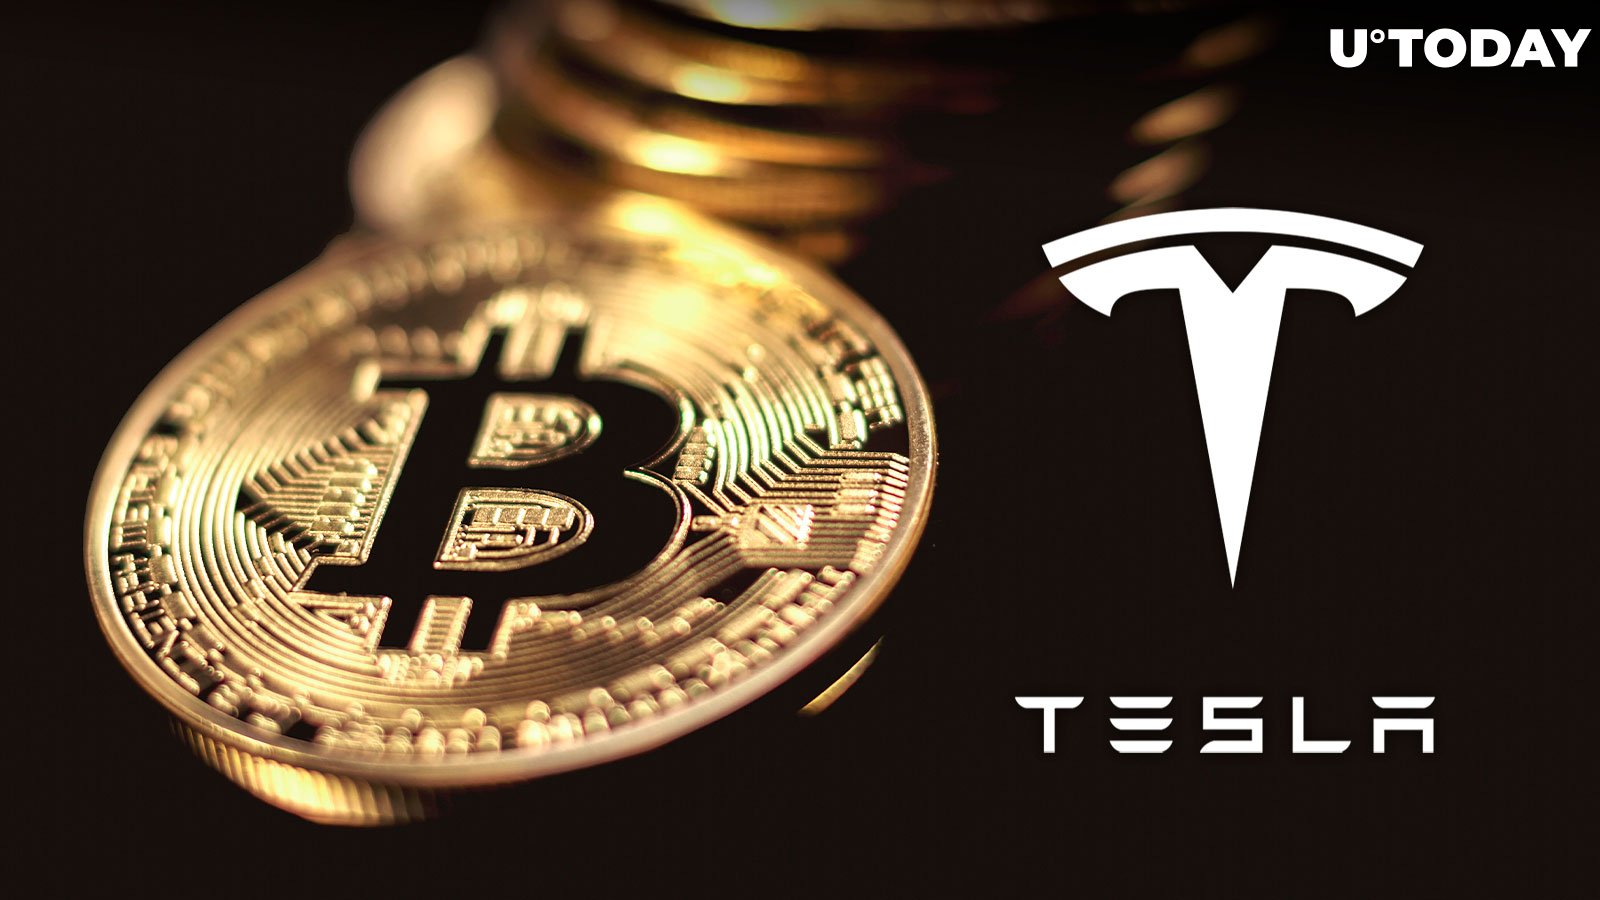 Here’s How Much Bitcoin Tesla Now Holds